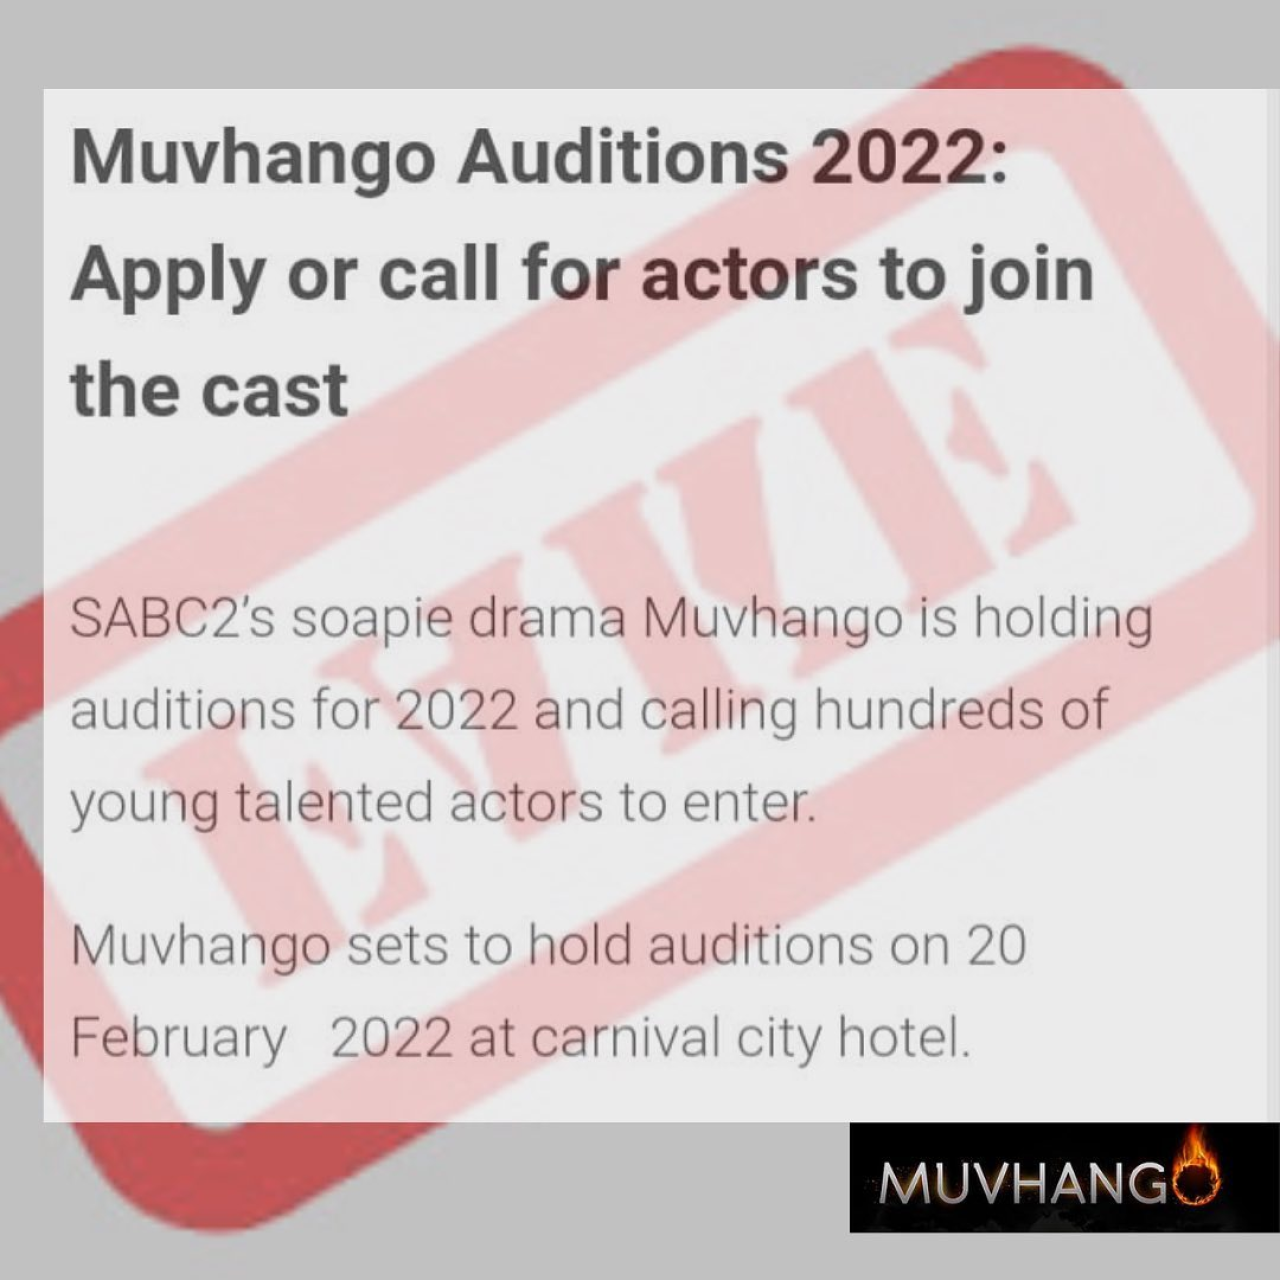 Long-running South South African television soap opera, Muvhango has addressed reports that it will be holding auditions for new talent to join the show. The "Word of Mouth" produced show categorically denied reports that it will be holding auditions later on this month to cast new talent in the show. This follows some reports that went viral on social media that Muvhango will be casting new people at auditions held in February. One such report reads, Muvhango Auditions 2022: Apply or call for actors to join the cast SABC2's soapie drama Muvhango is holding auditions for 2022 and calling hundreds of young talented actors to enter.